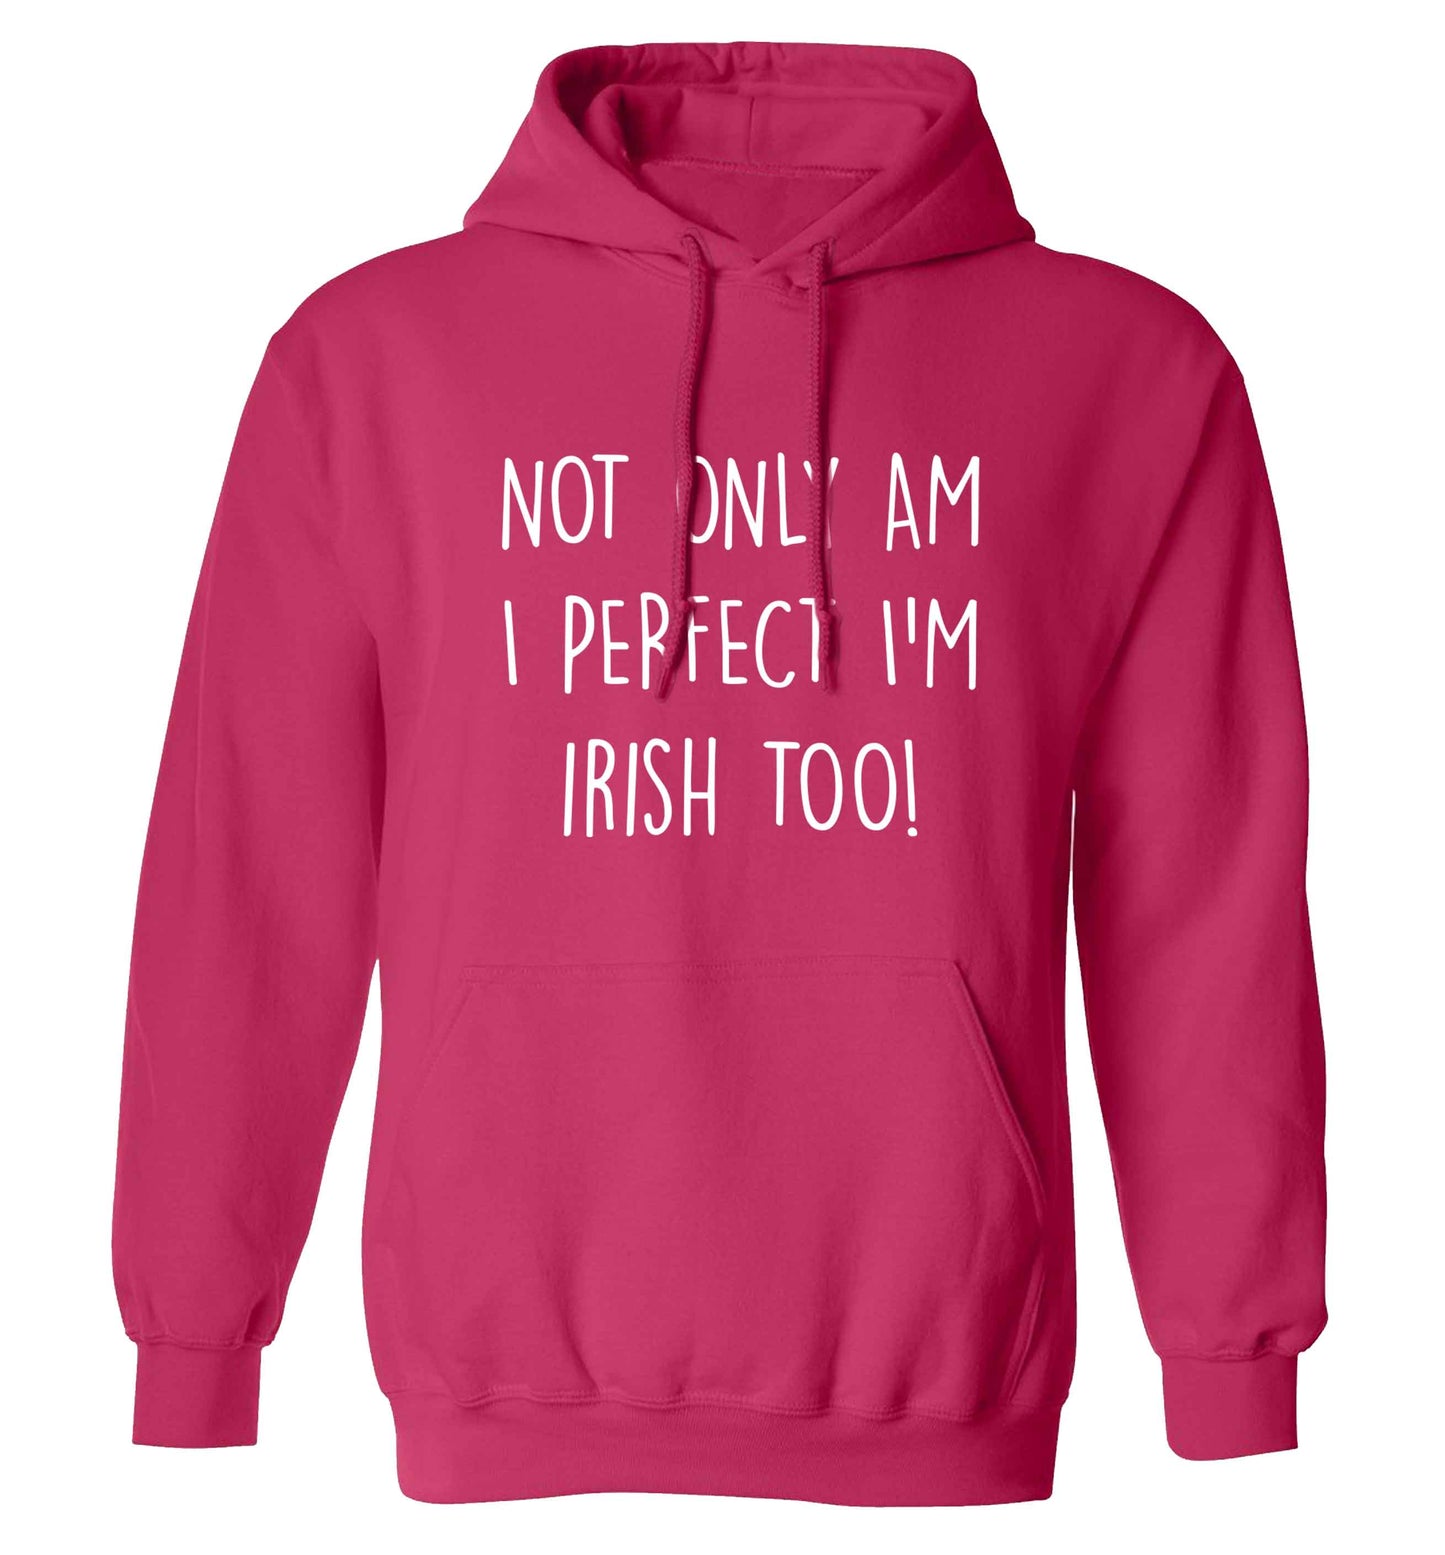 Not only am I perfect I'm Irish too! adults unisex pink hoodie 2XL